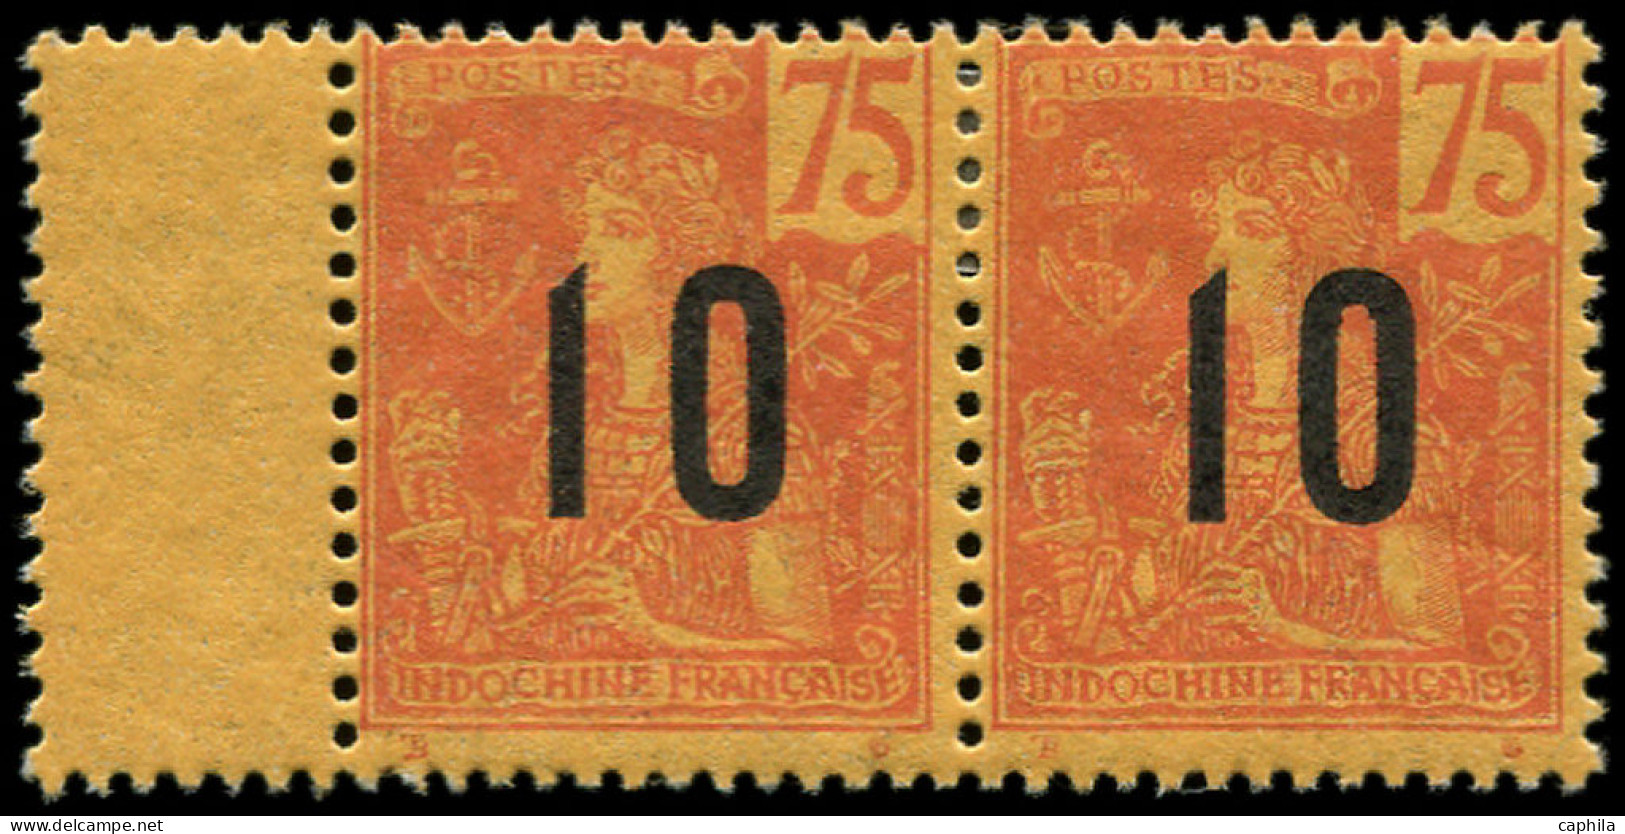 * INDOCHINE - Poste - 64Aa, Chiffres Espacés Tenant à Normal - Unused Stamps